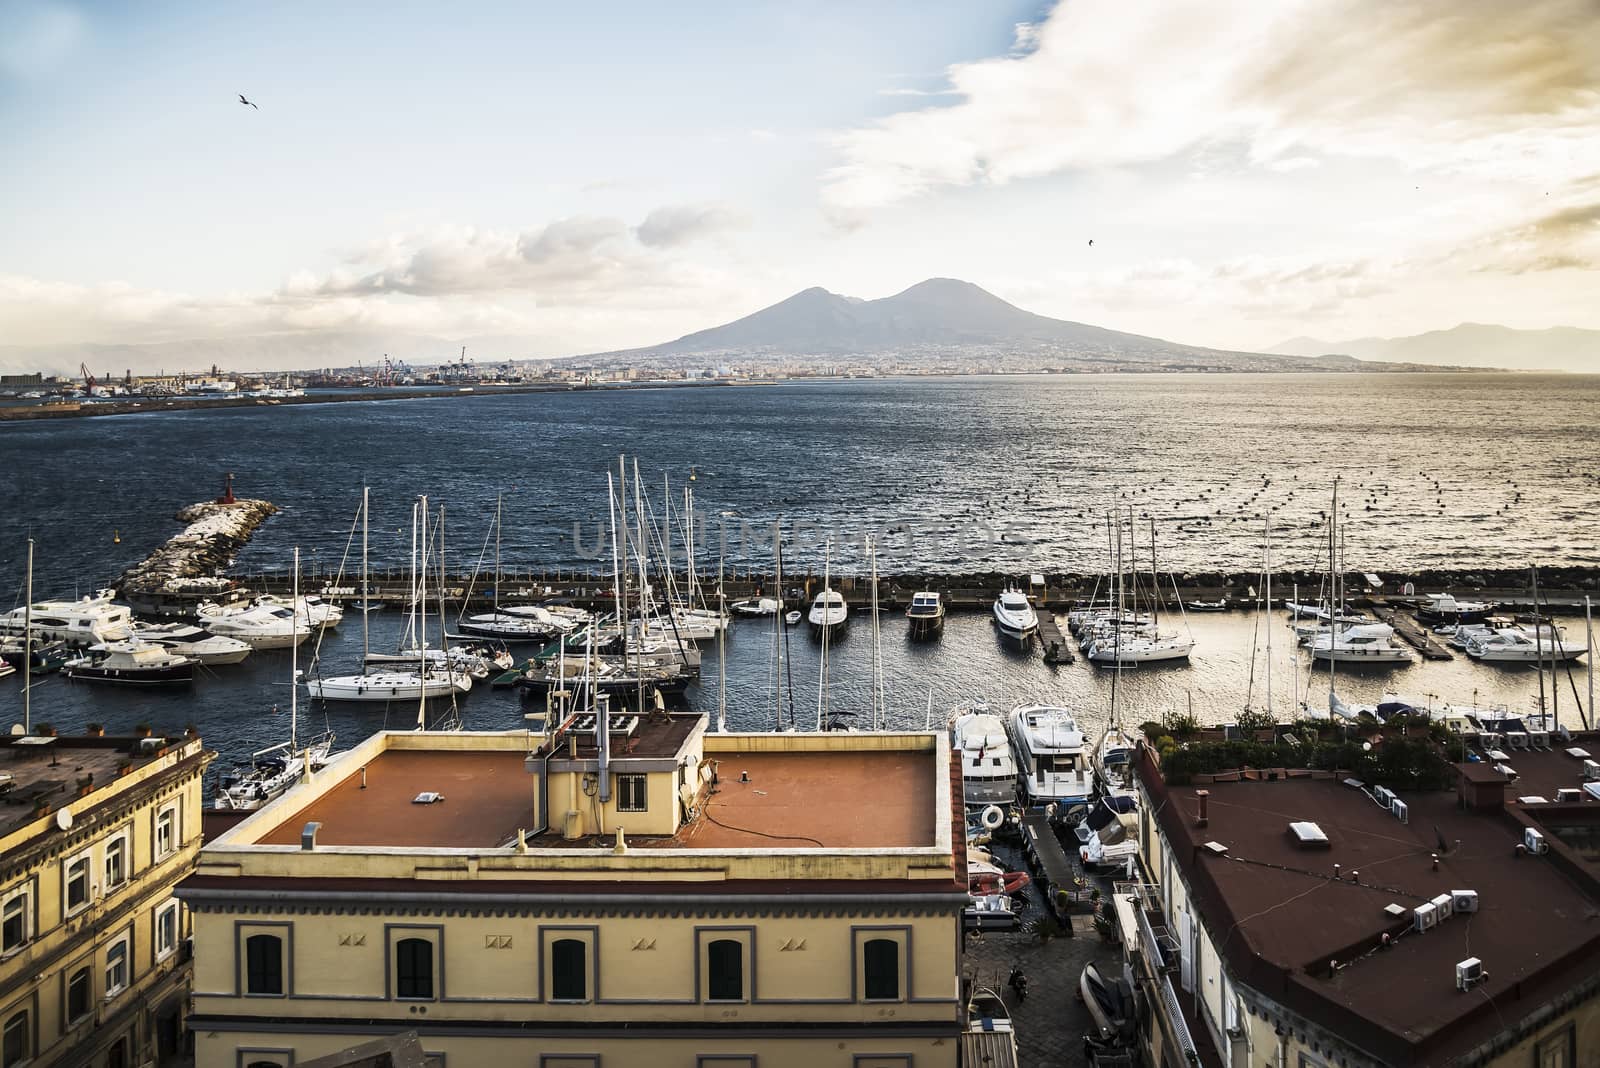 view of the city of Naples and its coastline, Italy